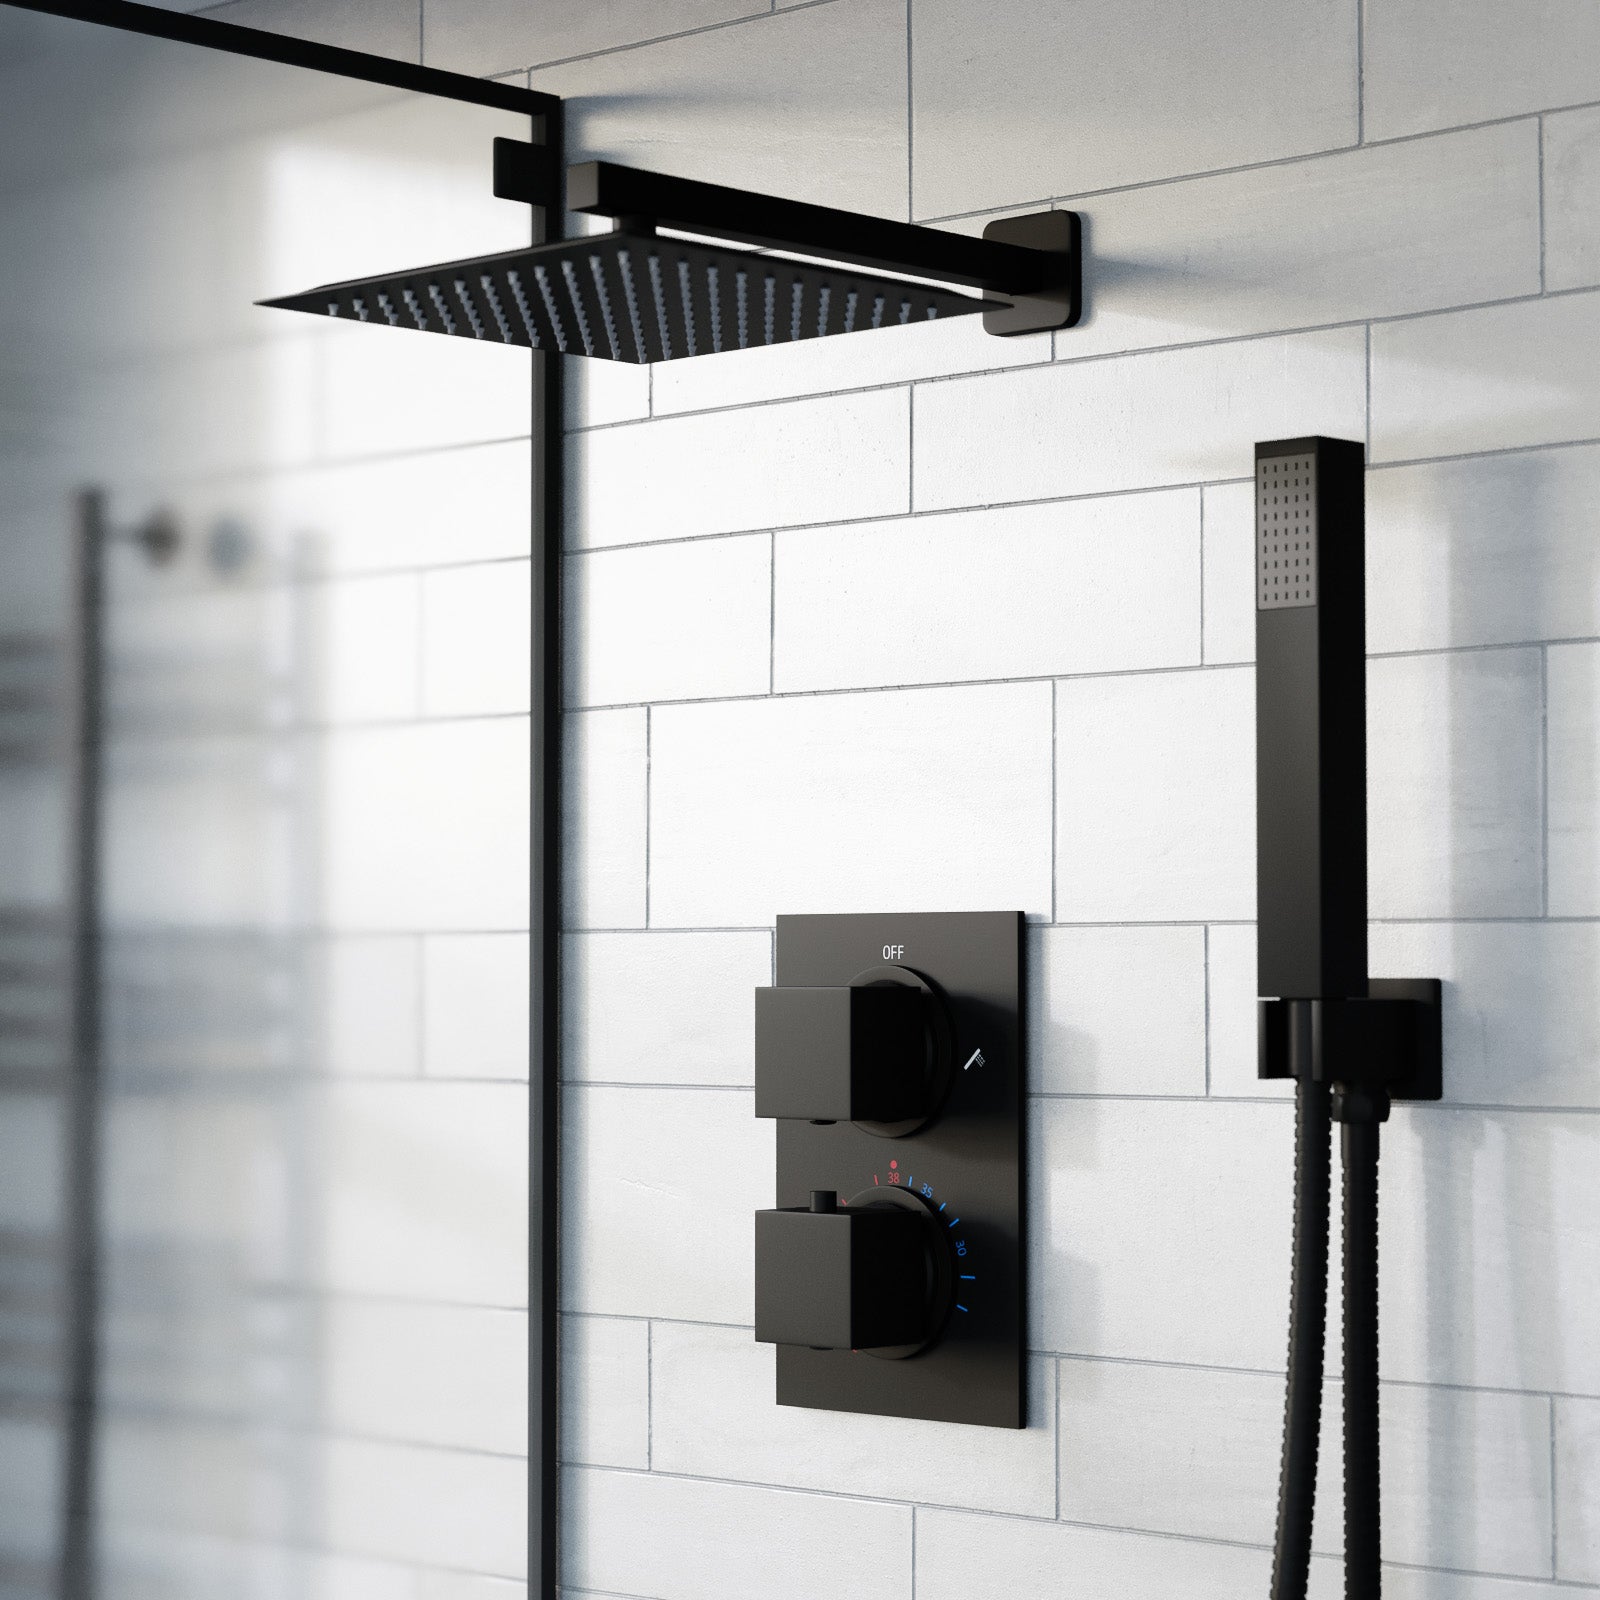 Folke 2 Dial 2 Way Round or Square Concealed Thermostatic Shower Mixer Valve, Shower Head, and Handset Chrome or Black